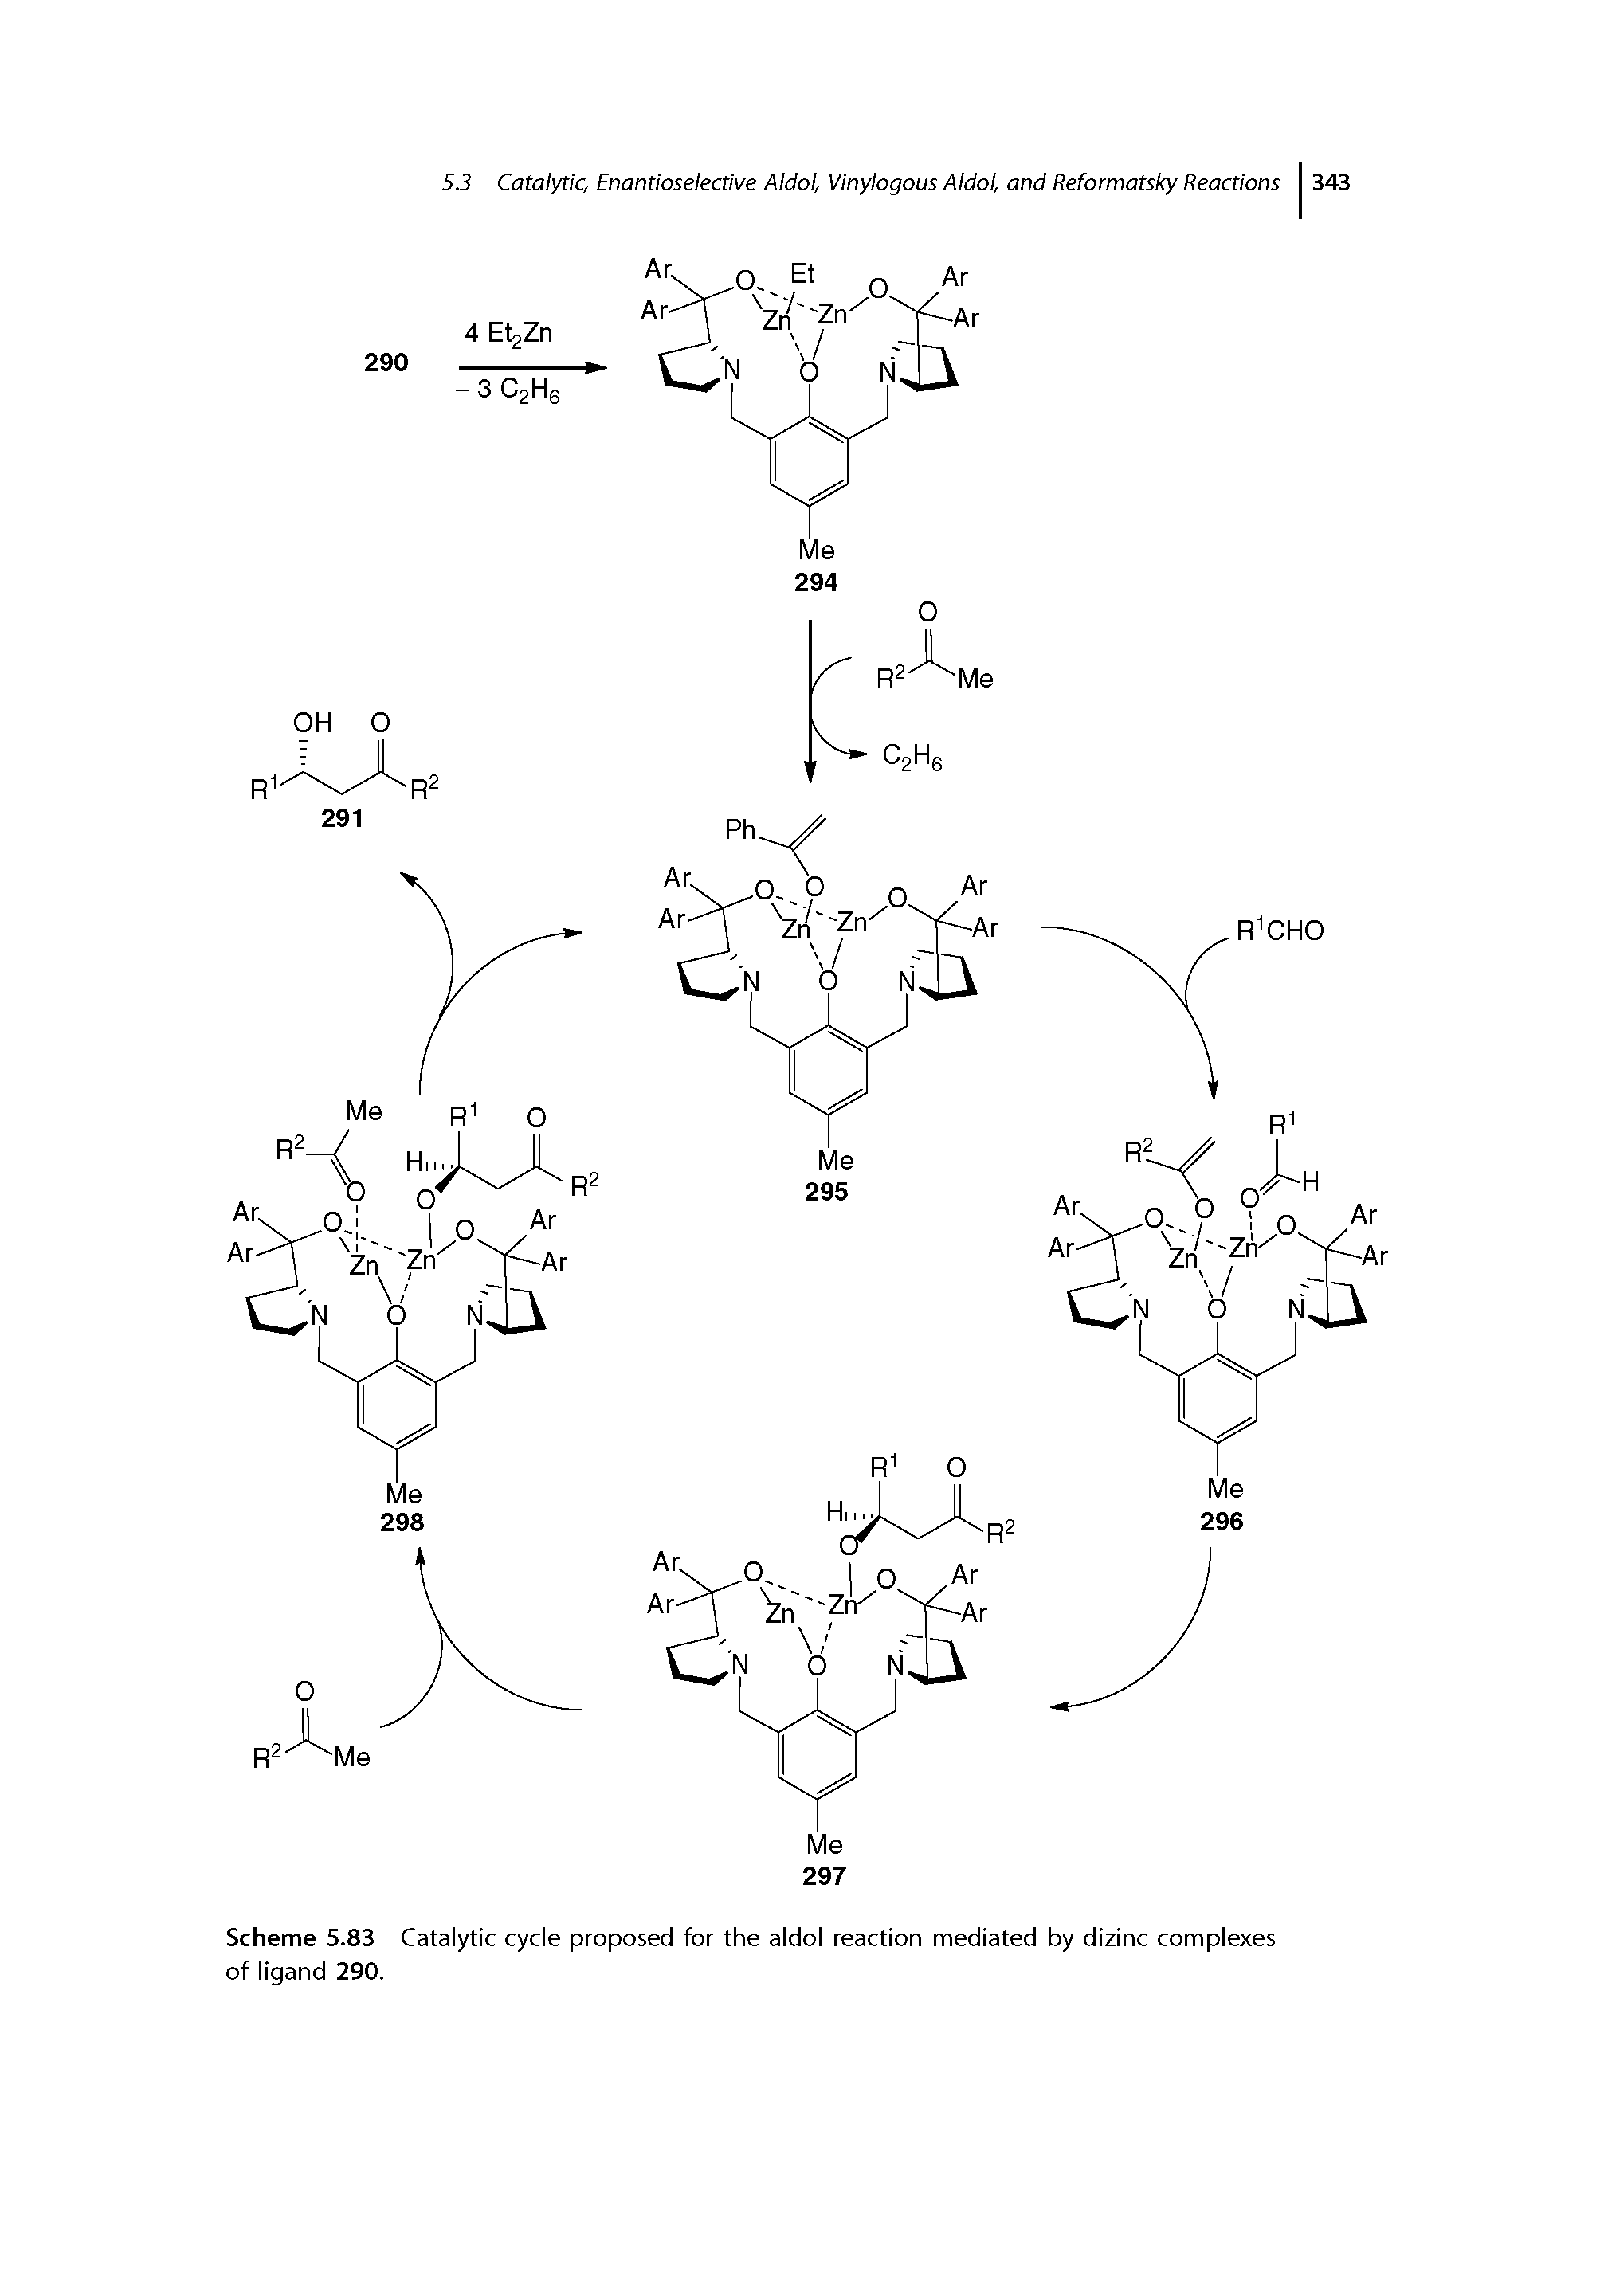 Scheme 5.83 Catalytic cycle proposed for the aldol reaction mediated by dizinc complexes of ligand 290.